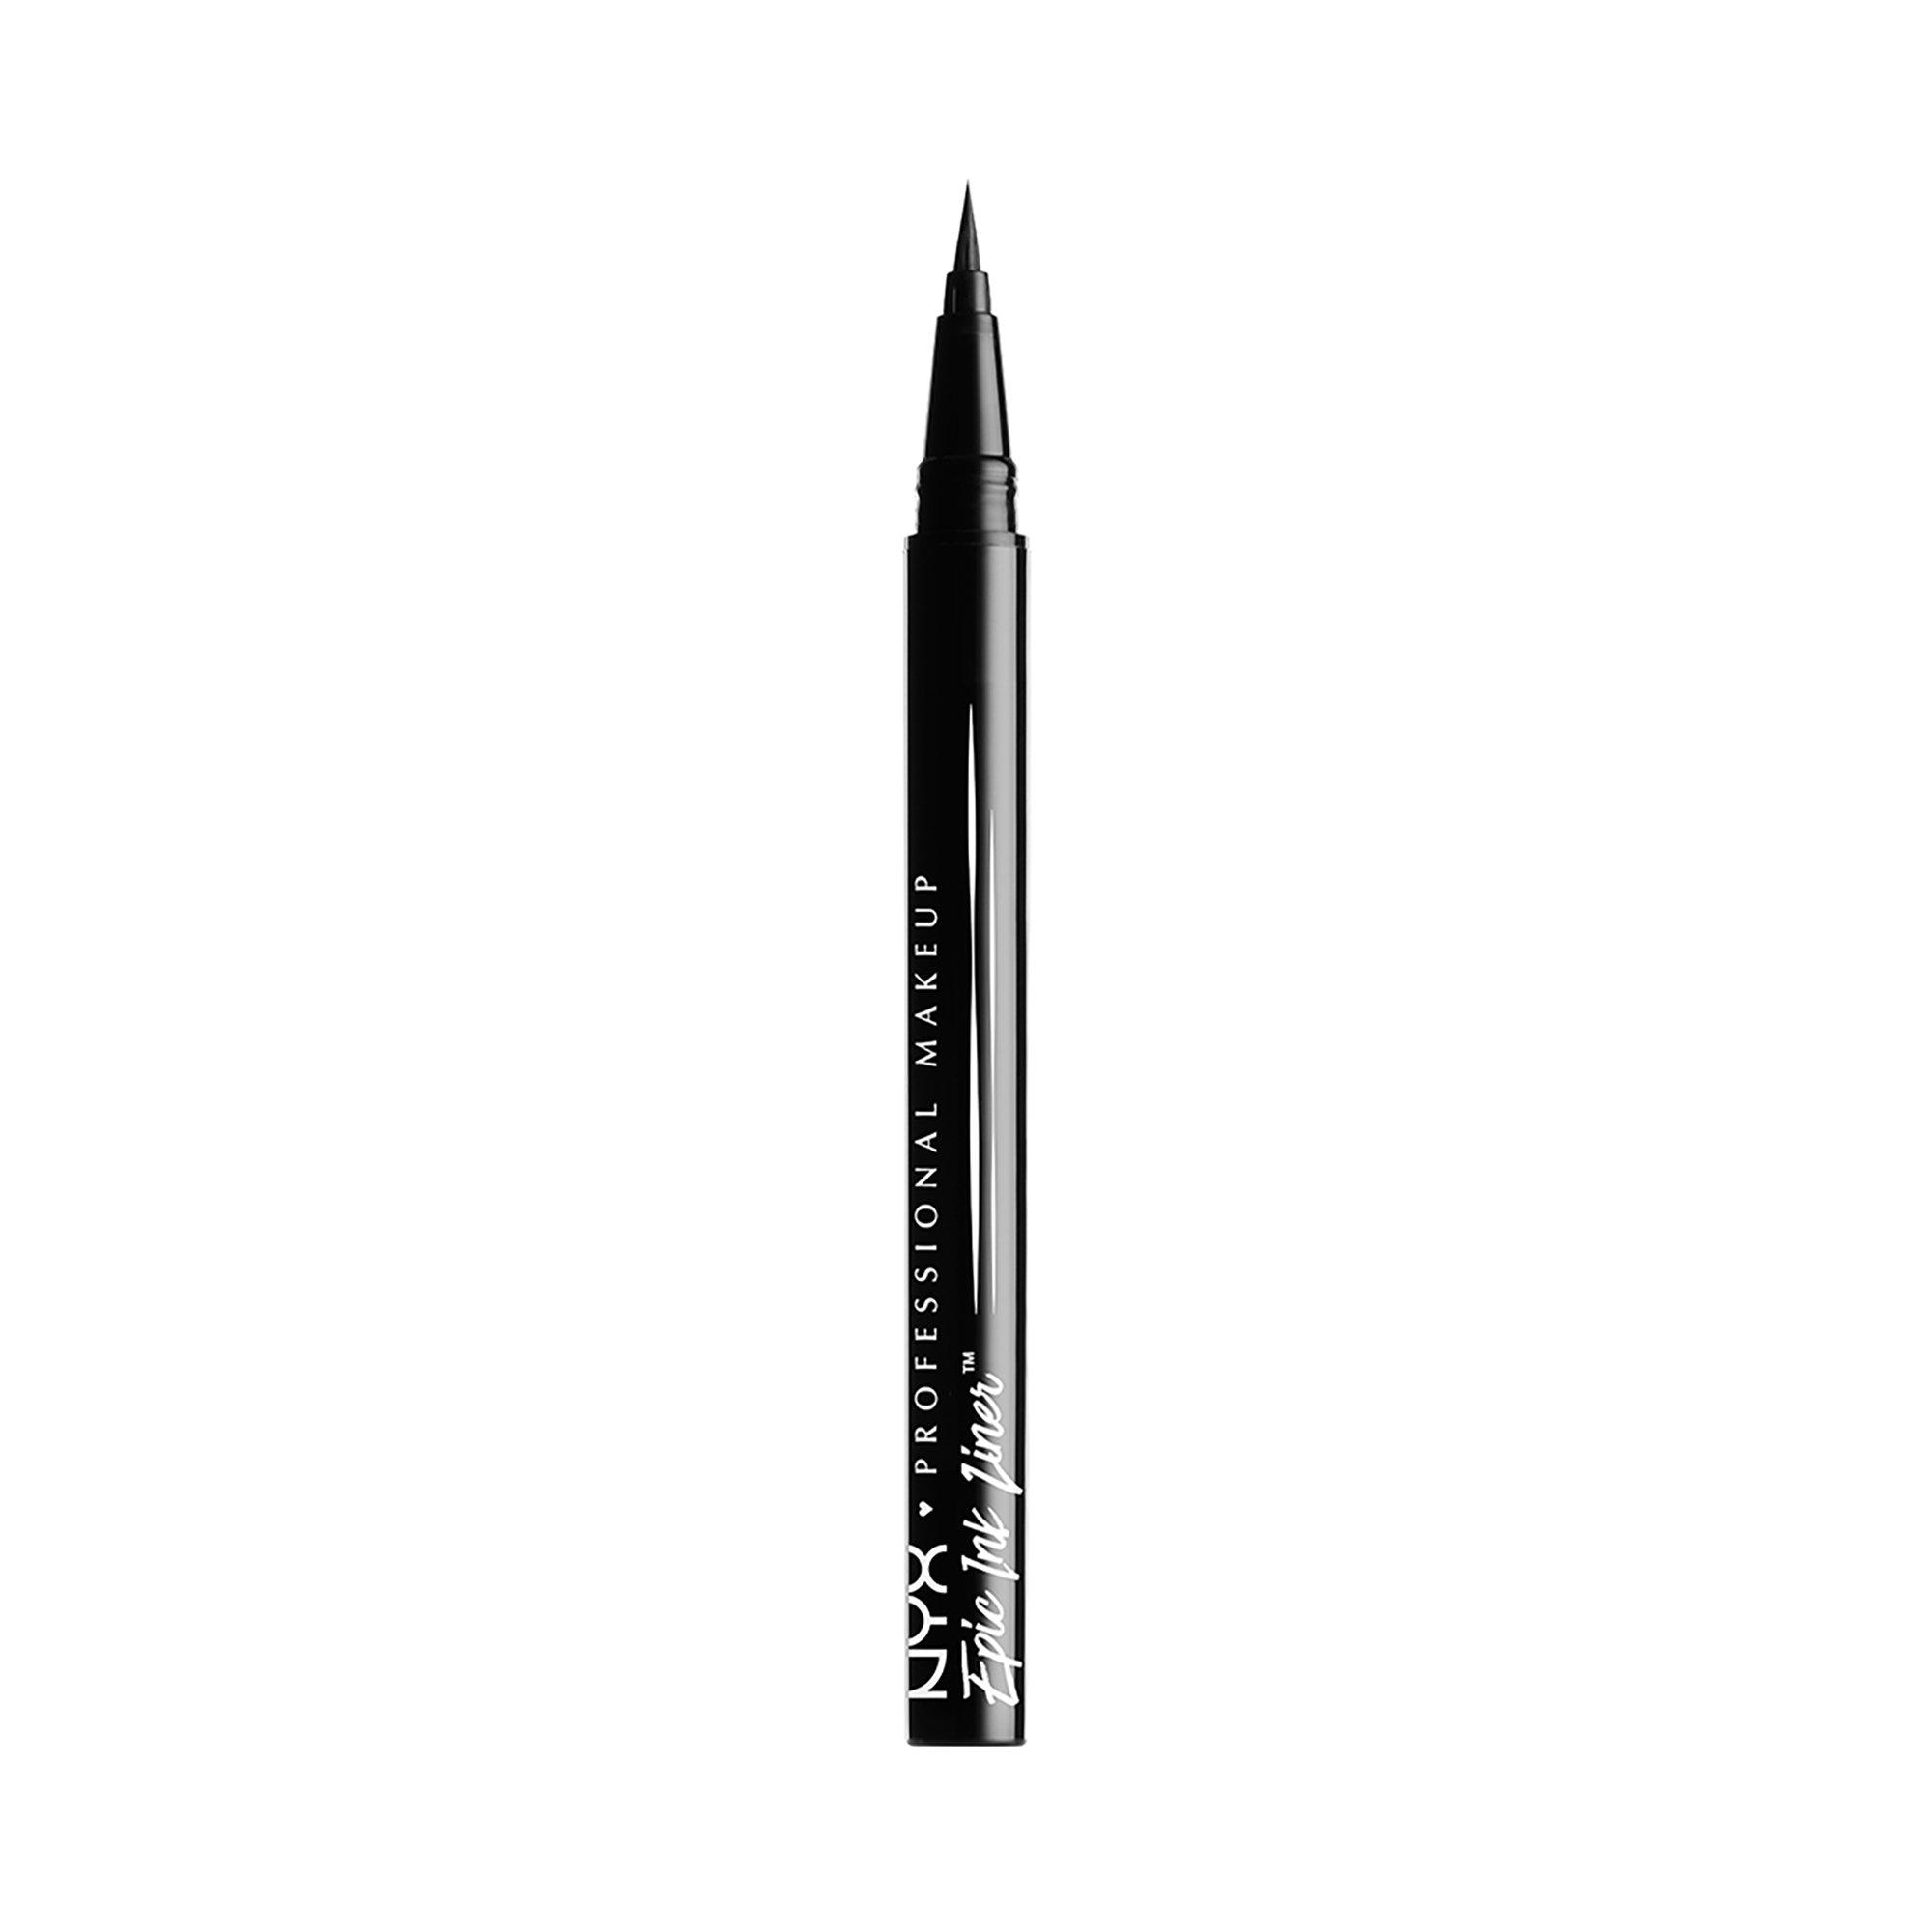 Image of NYX-PROFESSIONAL-MAKEUP Epic Ink Liner - 13g